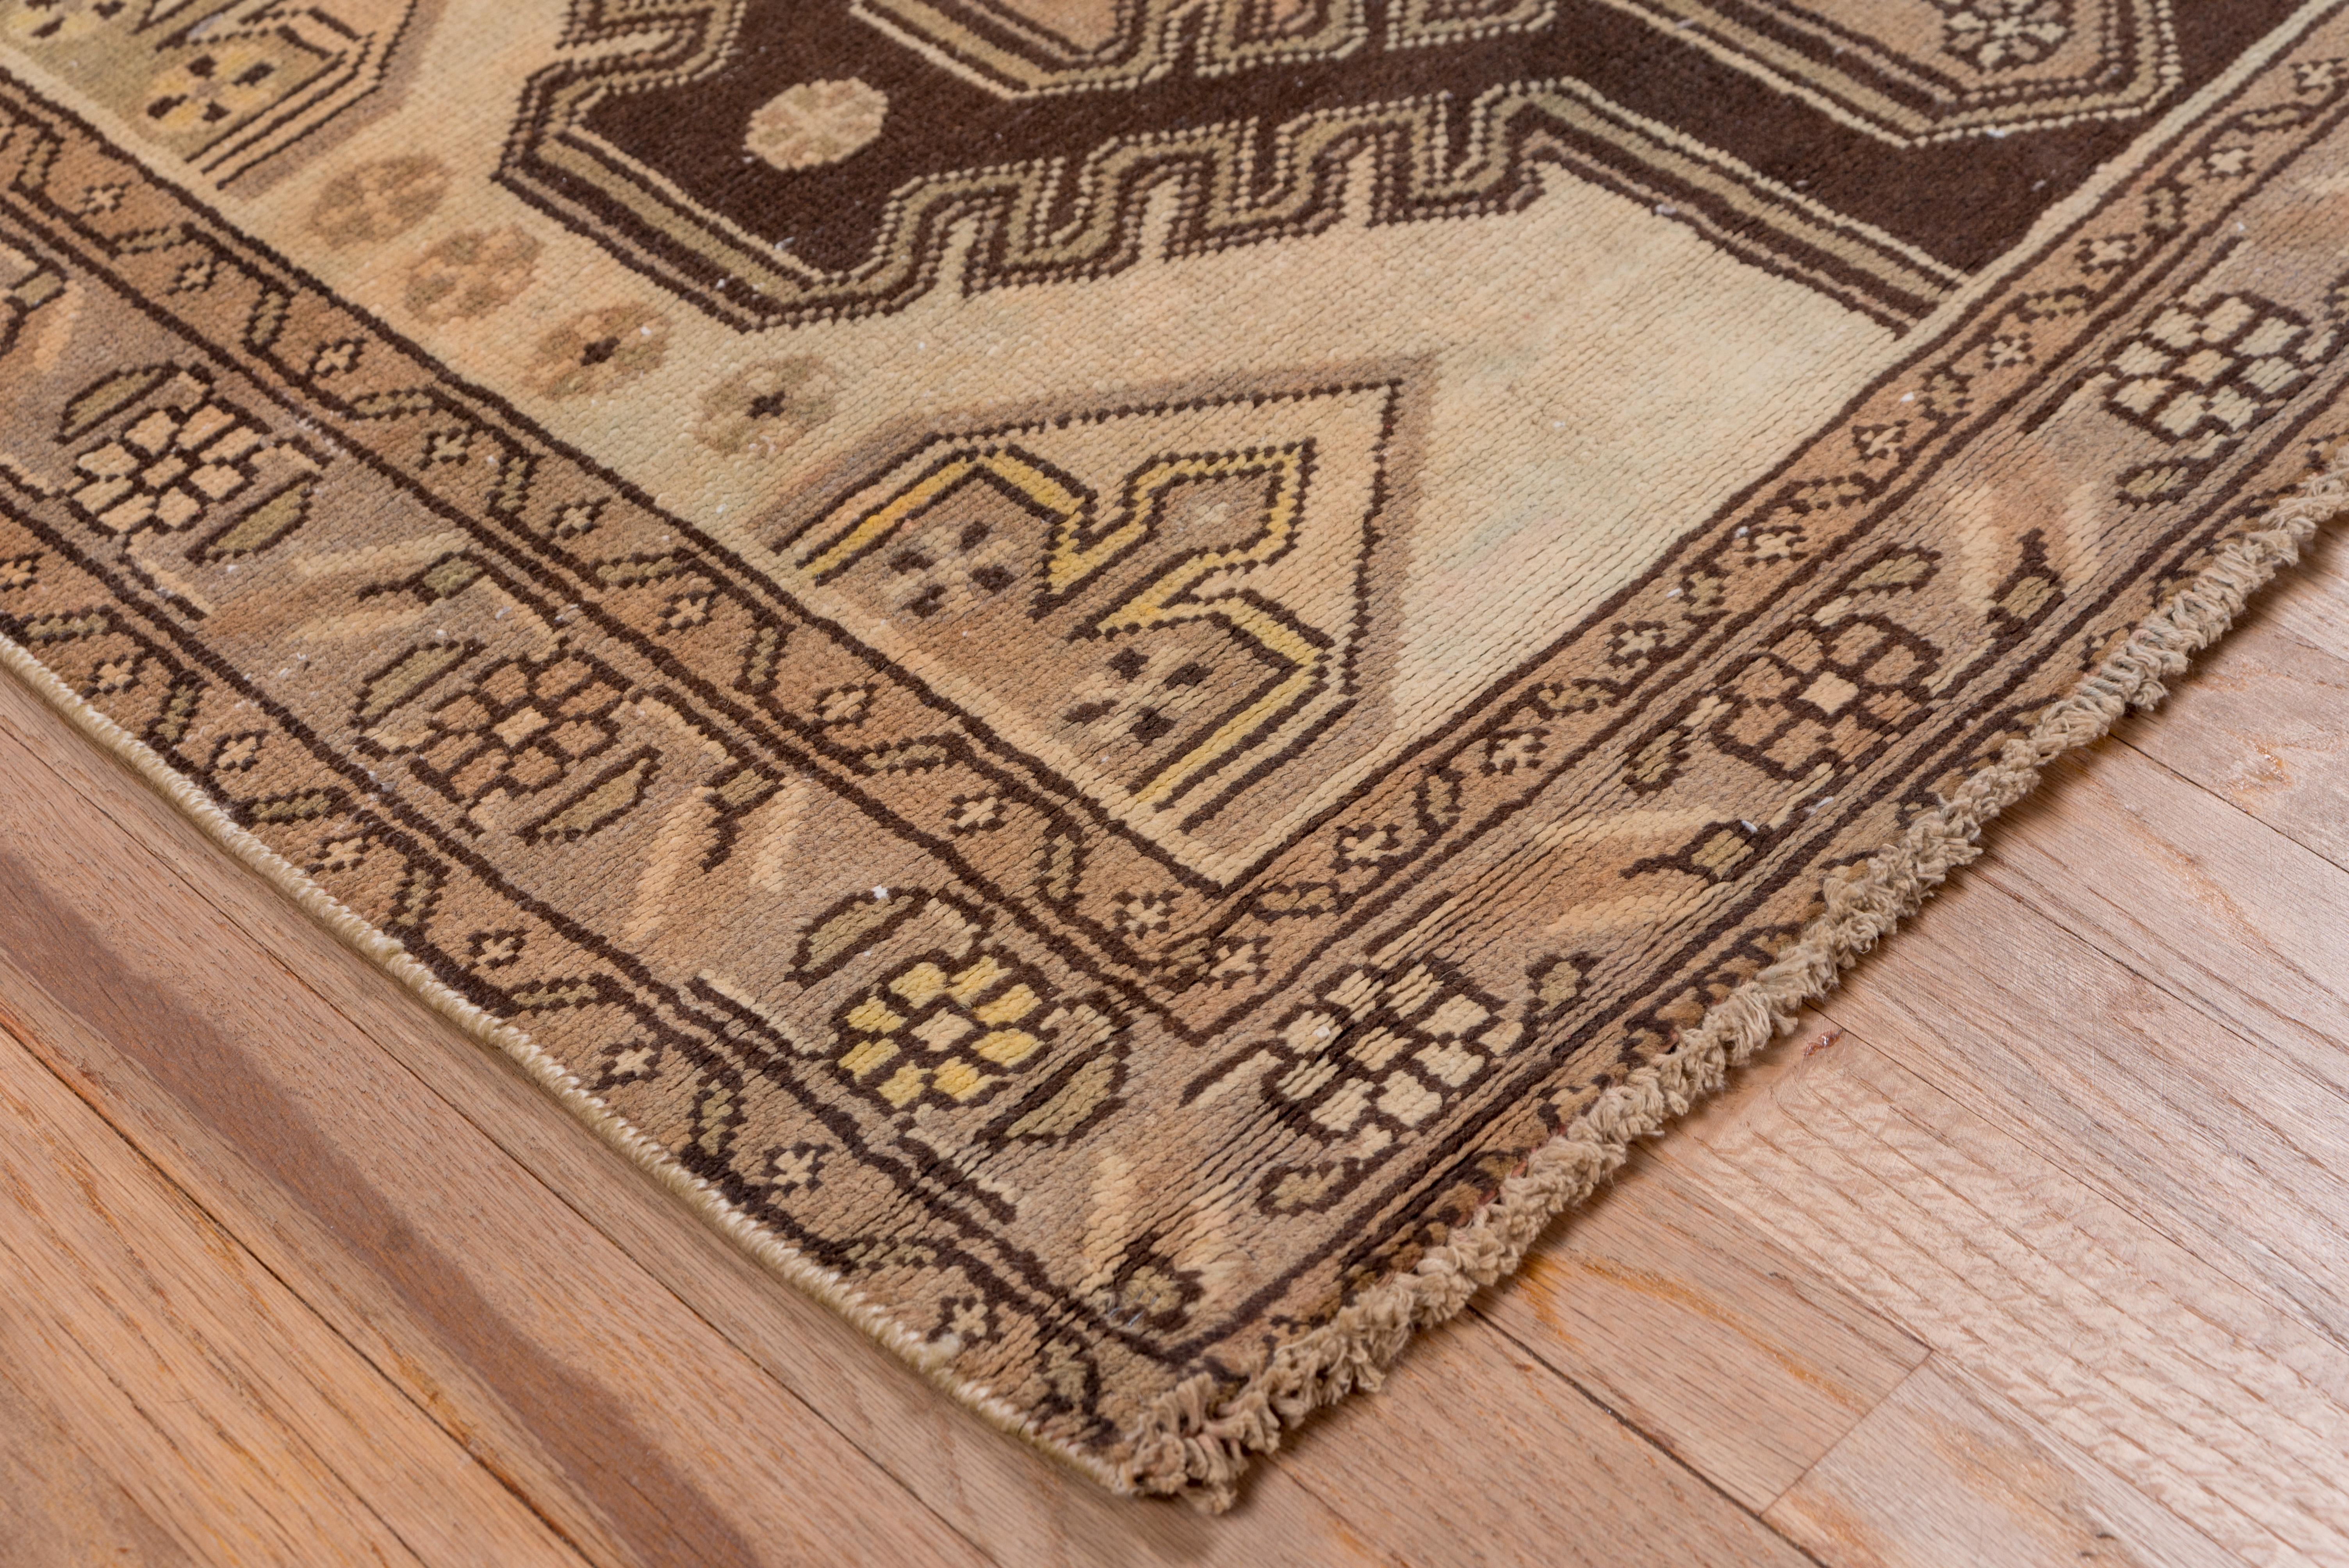 Hand-Knotted Antique Malayer Scatter Rug, Neutral Palette with Yellow Accents, Circa 1930s For Sale